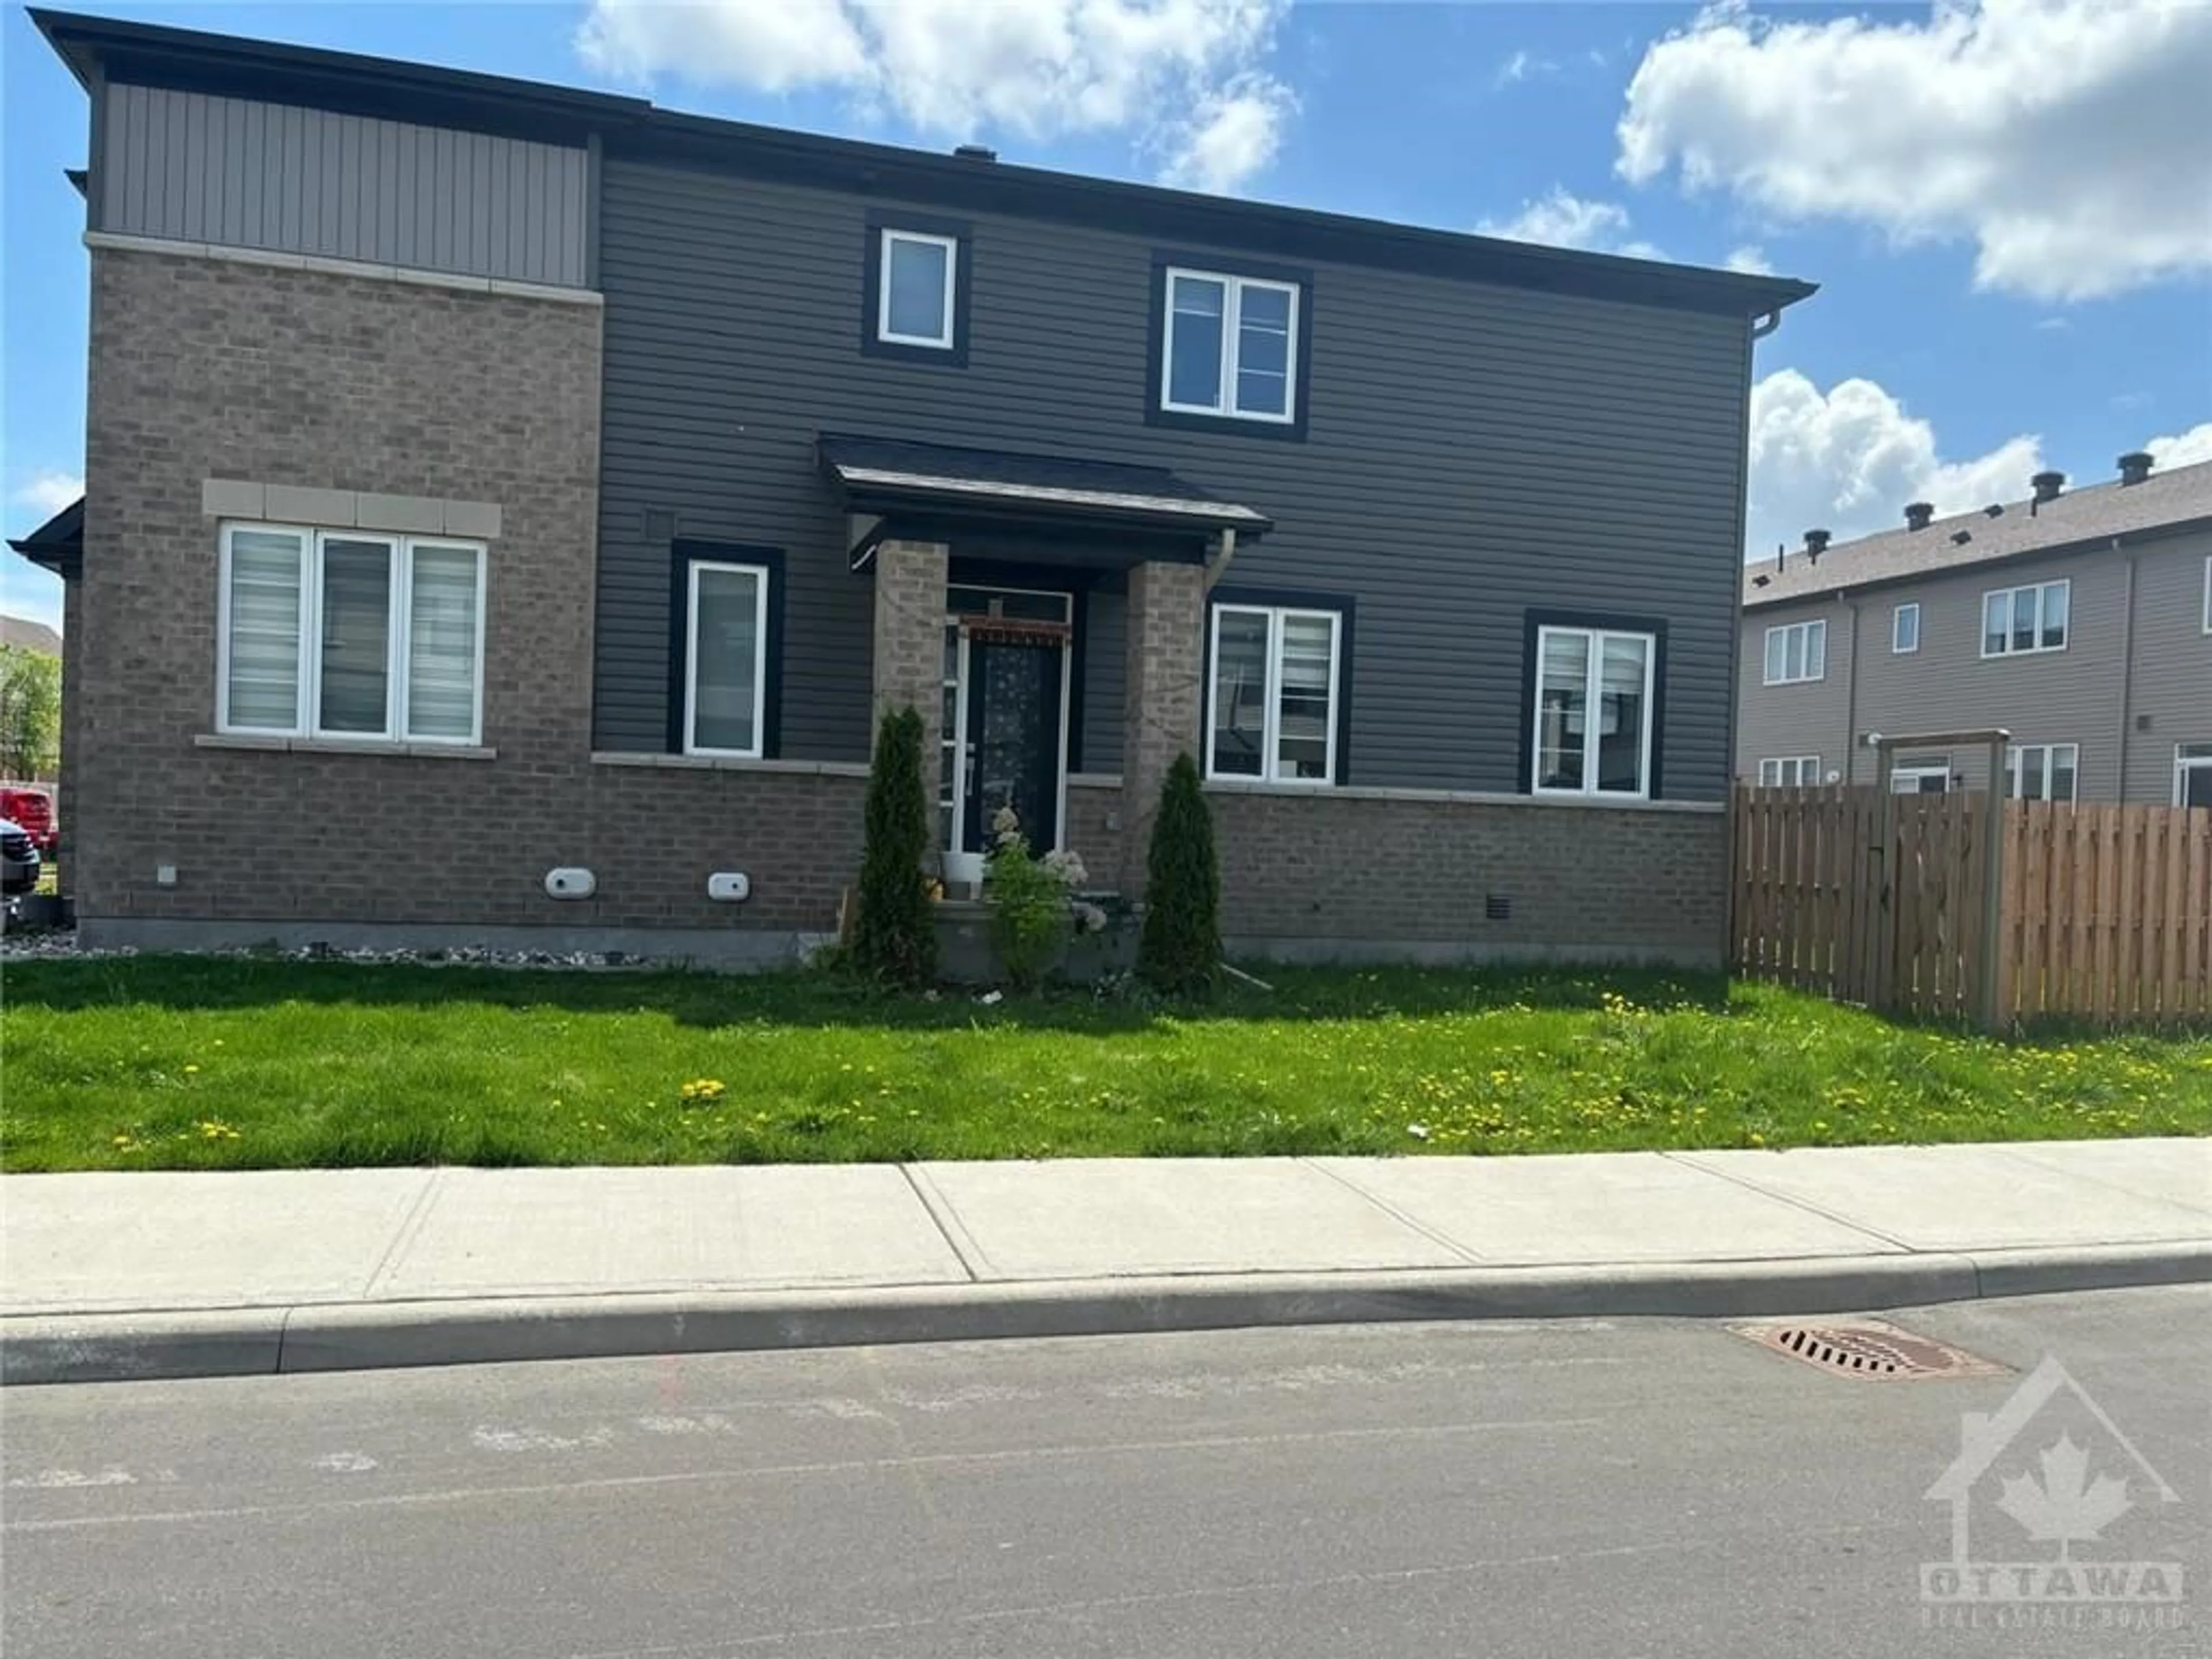 Frontside or backside of a home for 900 SERRANO St, Orleans Ontario K4A 4T7